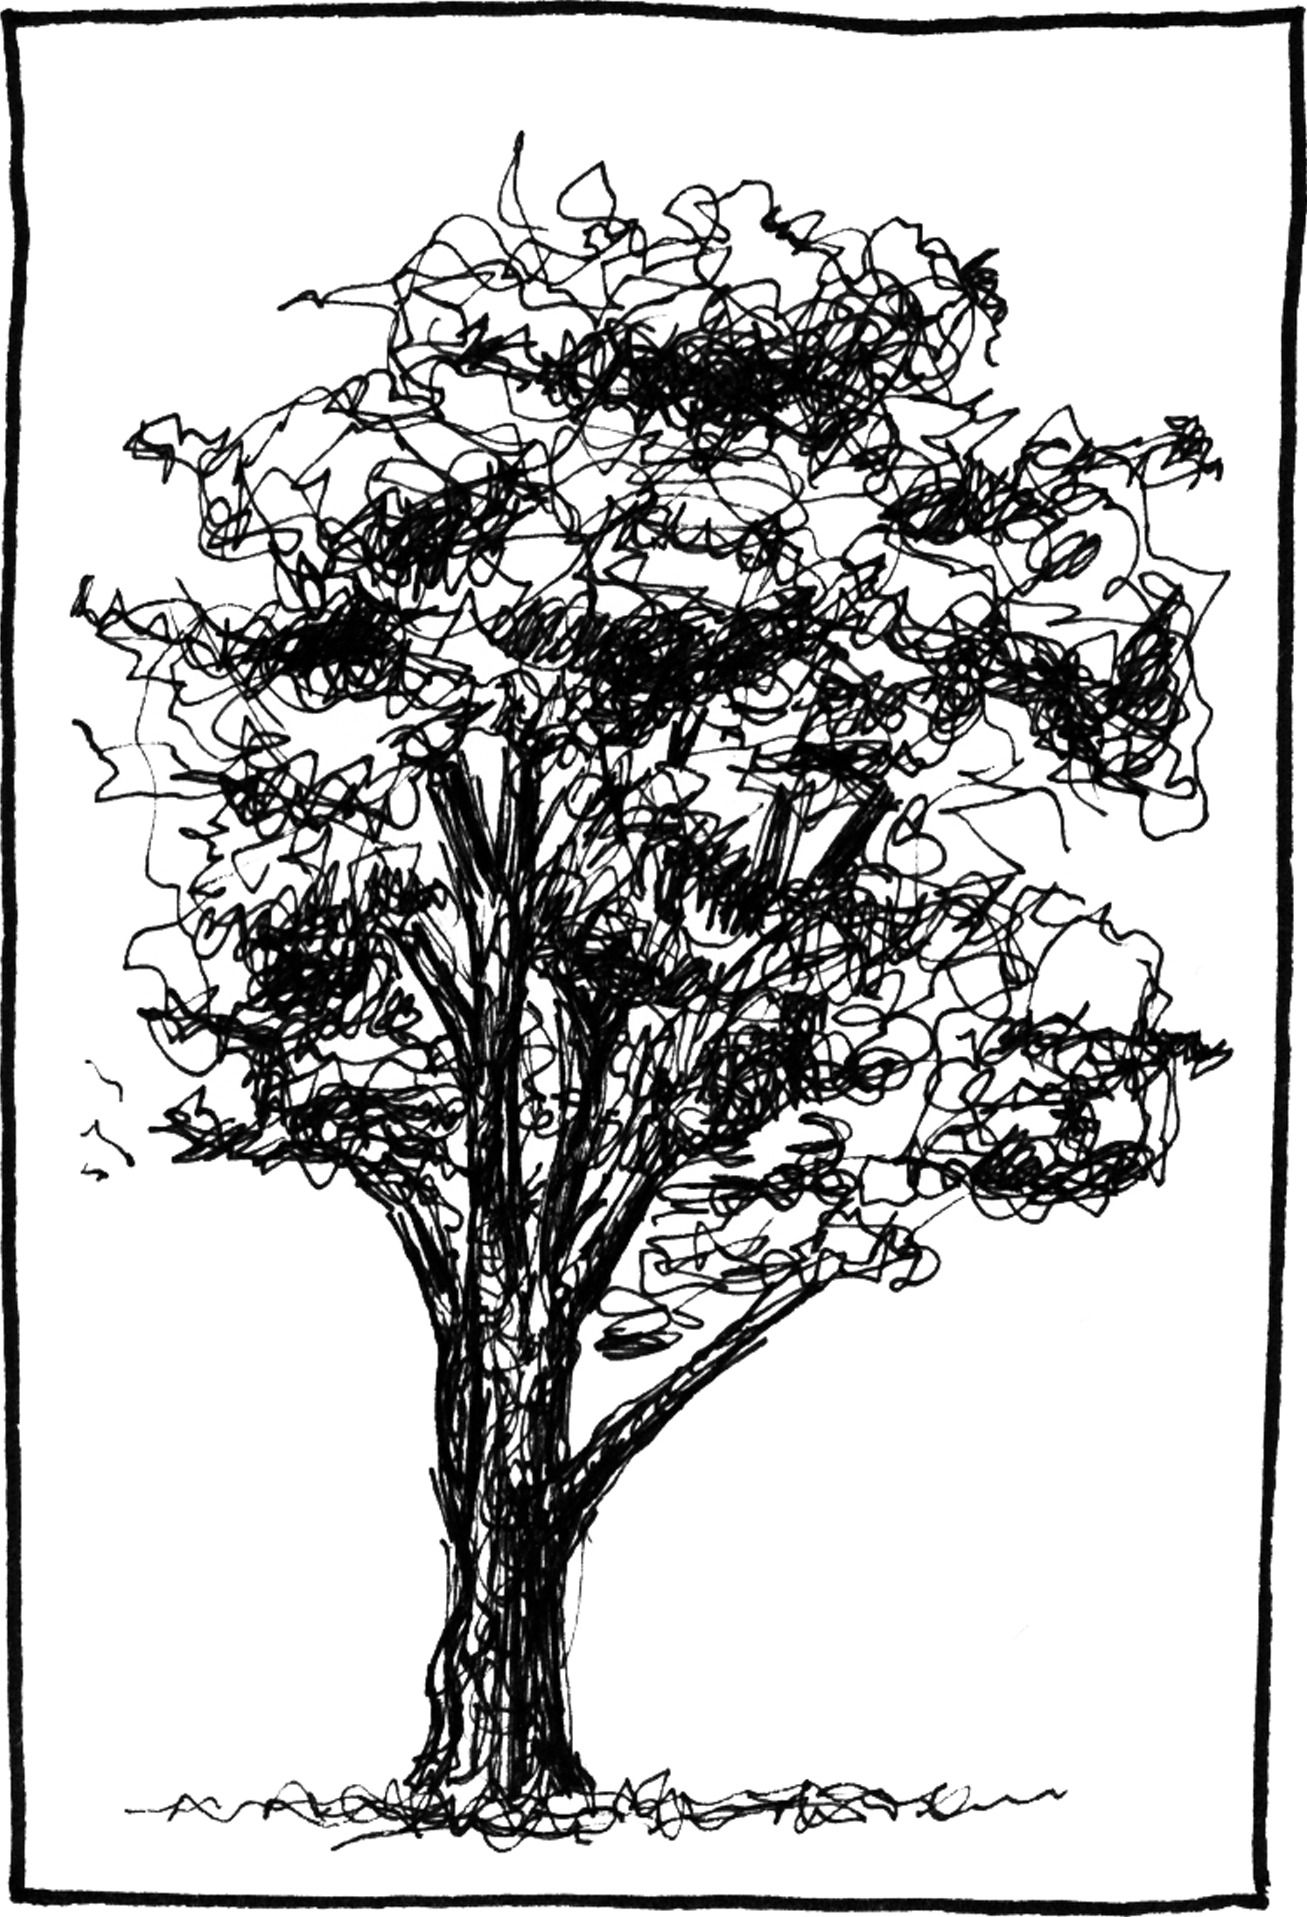 Quercus agrifolia - Drawing by Camillo Visini